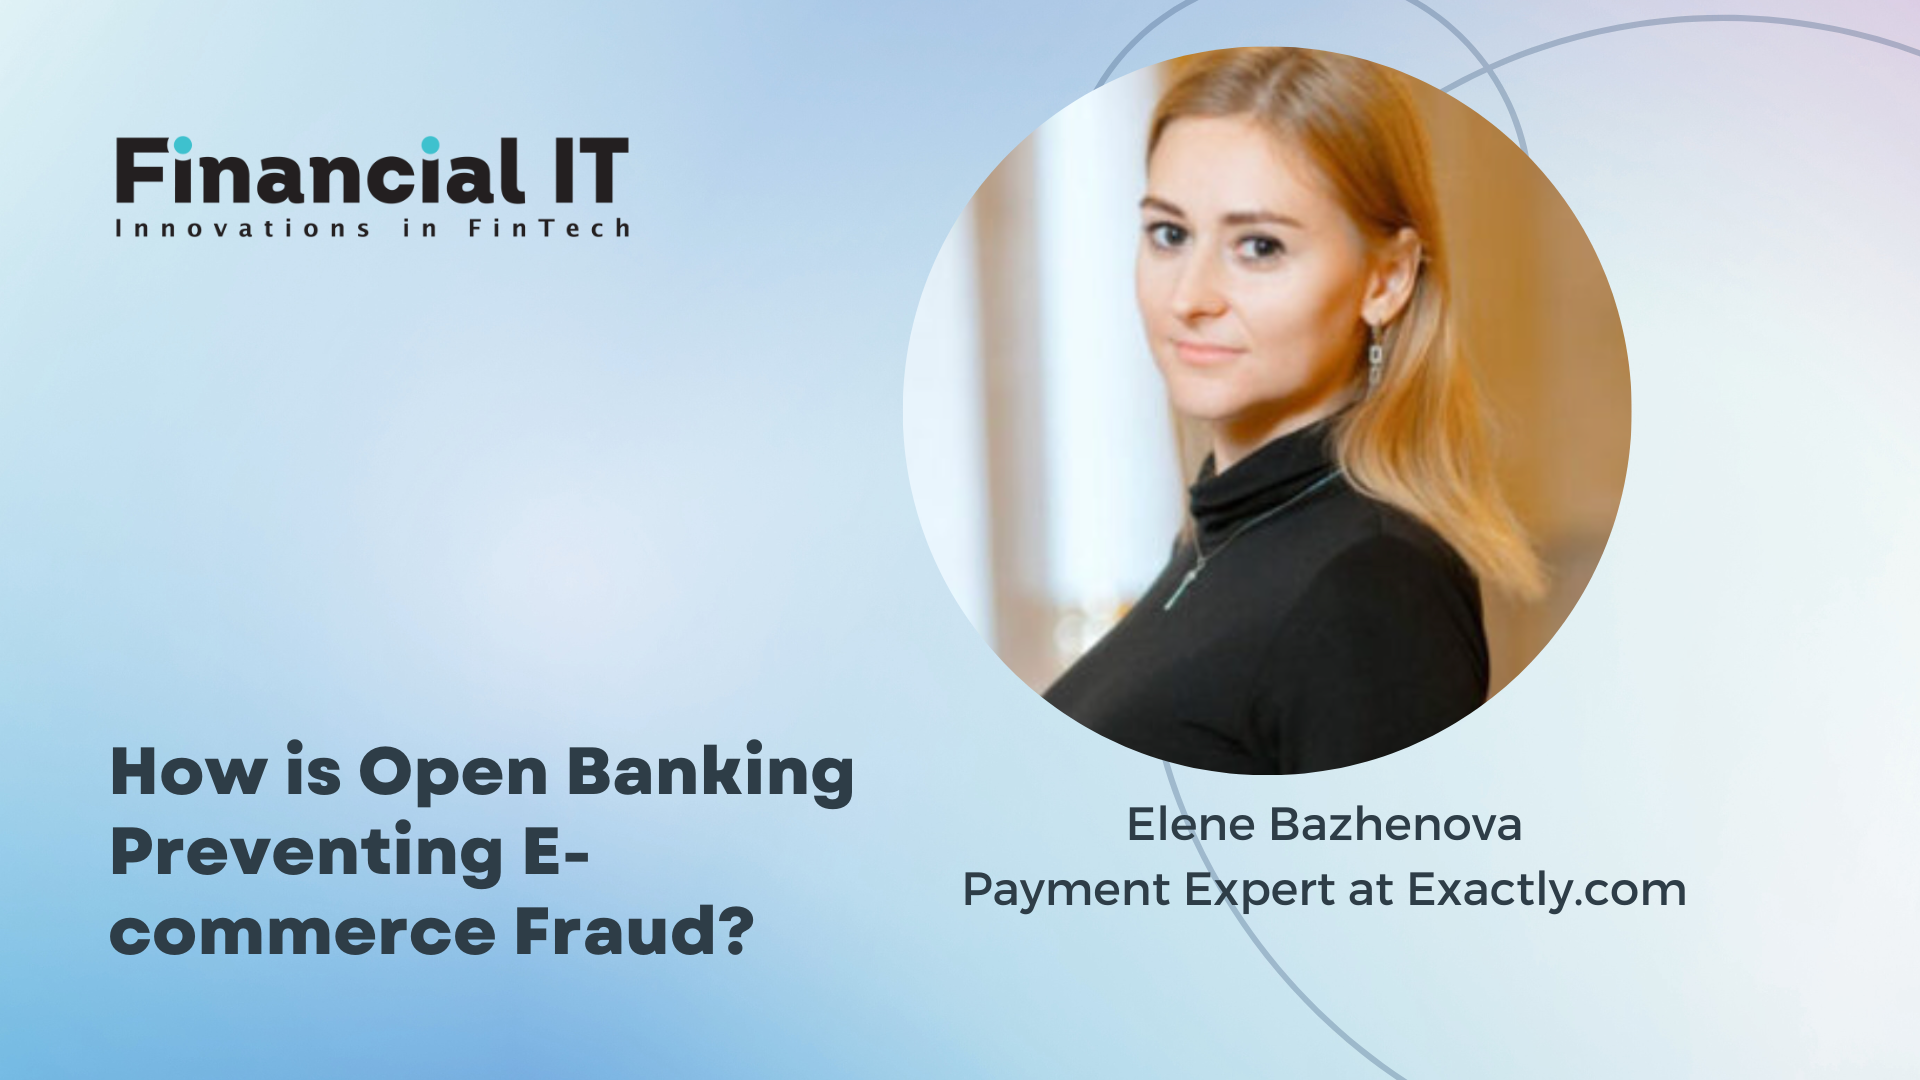 How is Open Banking Preventing E-commerce Fraud?